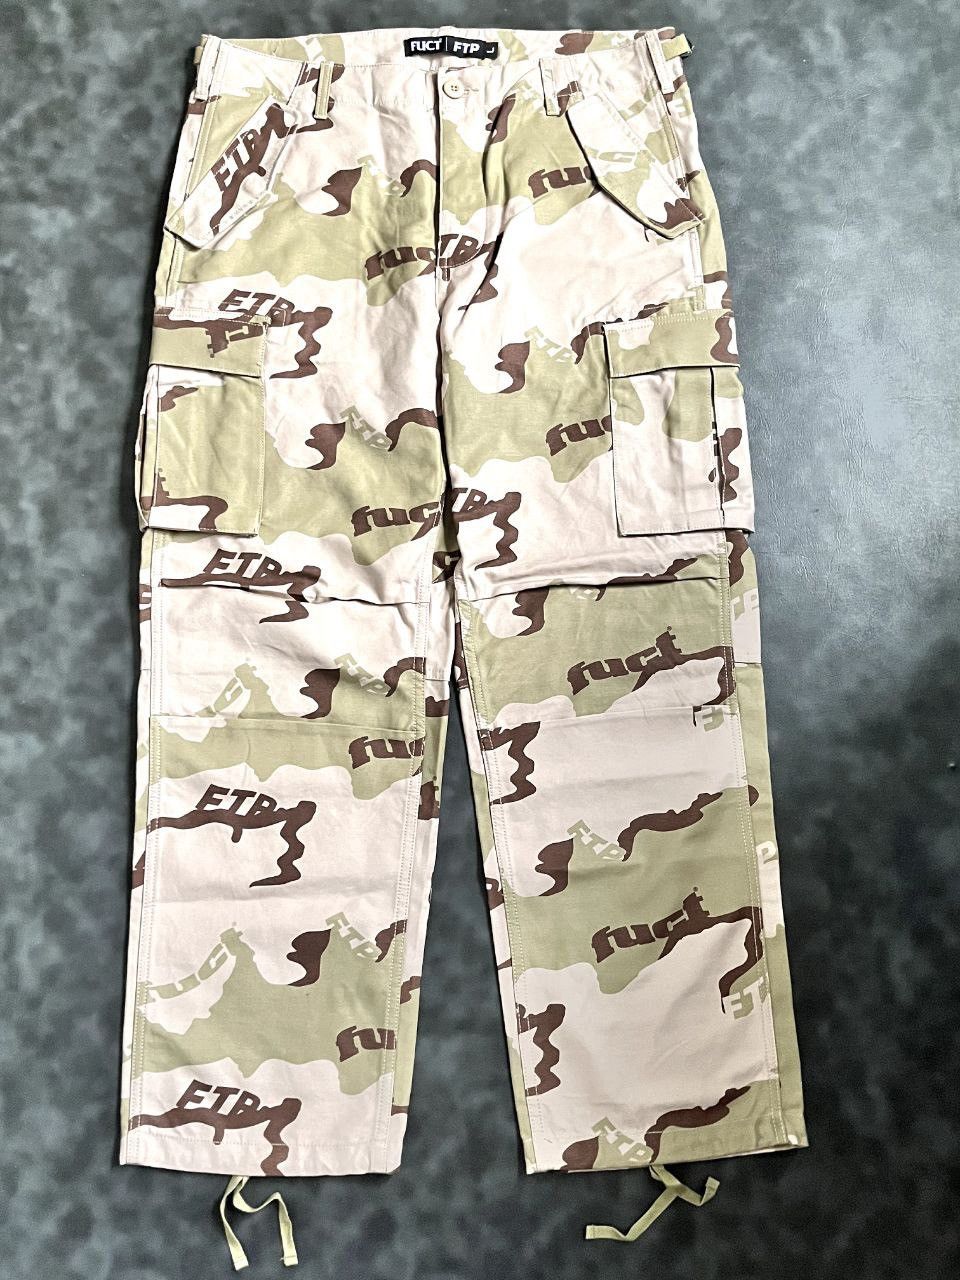 Fuct FUCT x FTP SS22 Cargo Pants | Grailed